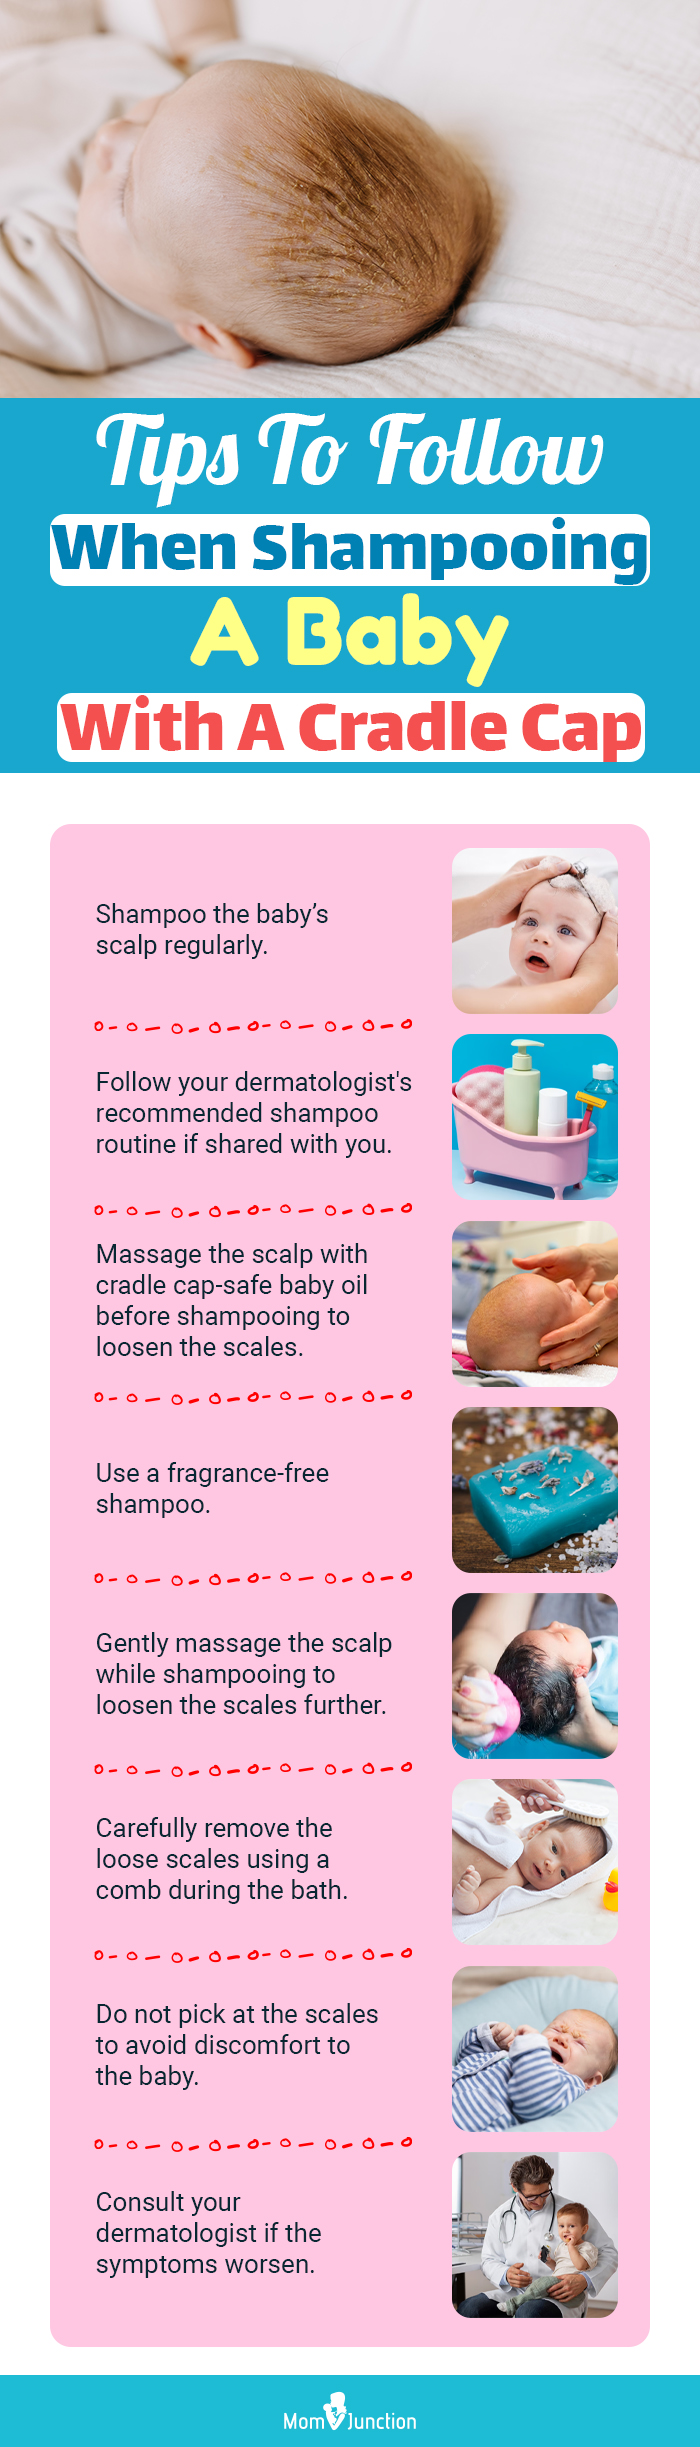 Tips To Follow When Shampooing A Baby With A Cradle Cap (infographic)